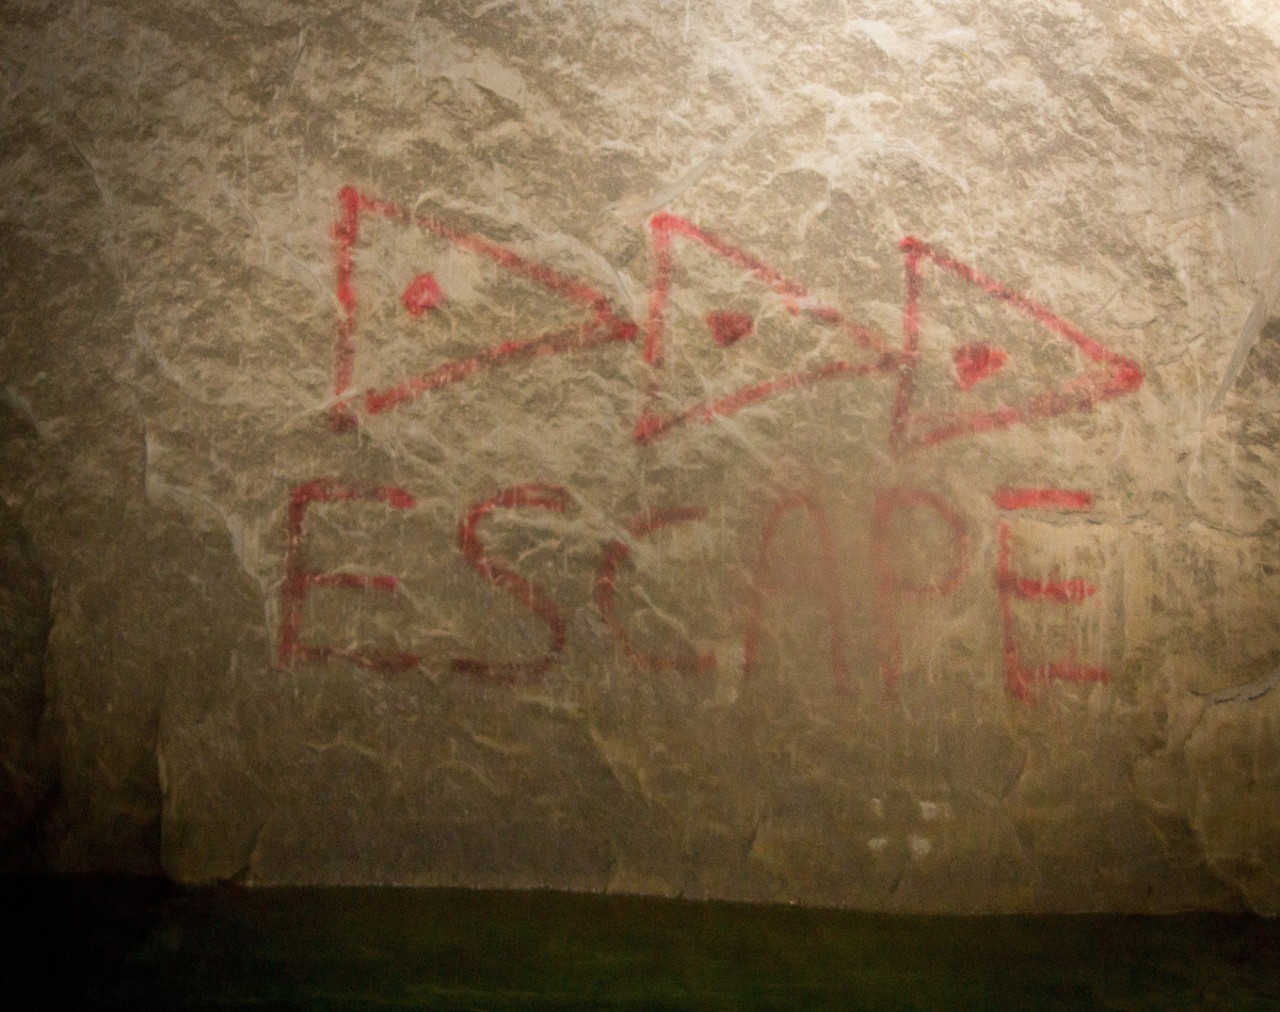 The miners marked the escape route to be used in case of an emergency with three triangles pointing toward an exit.